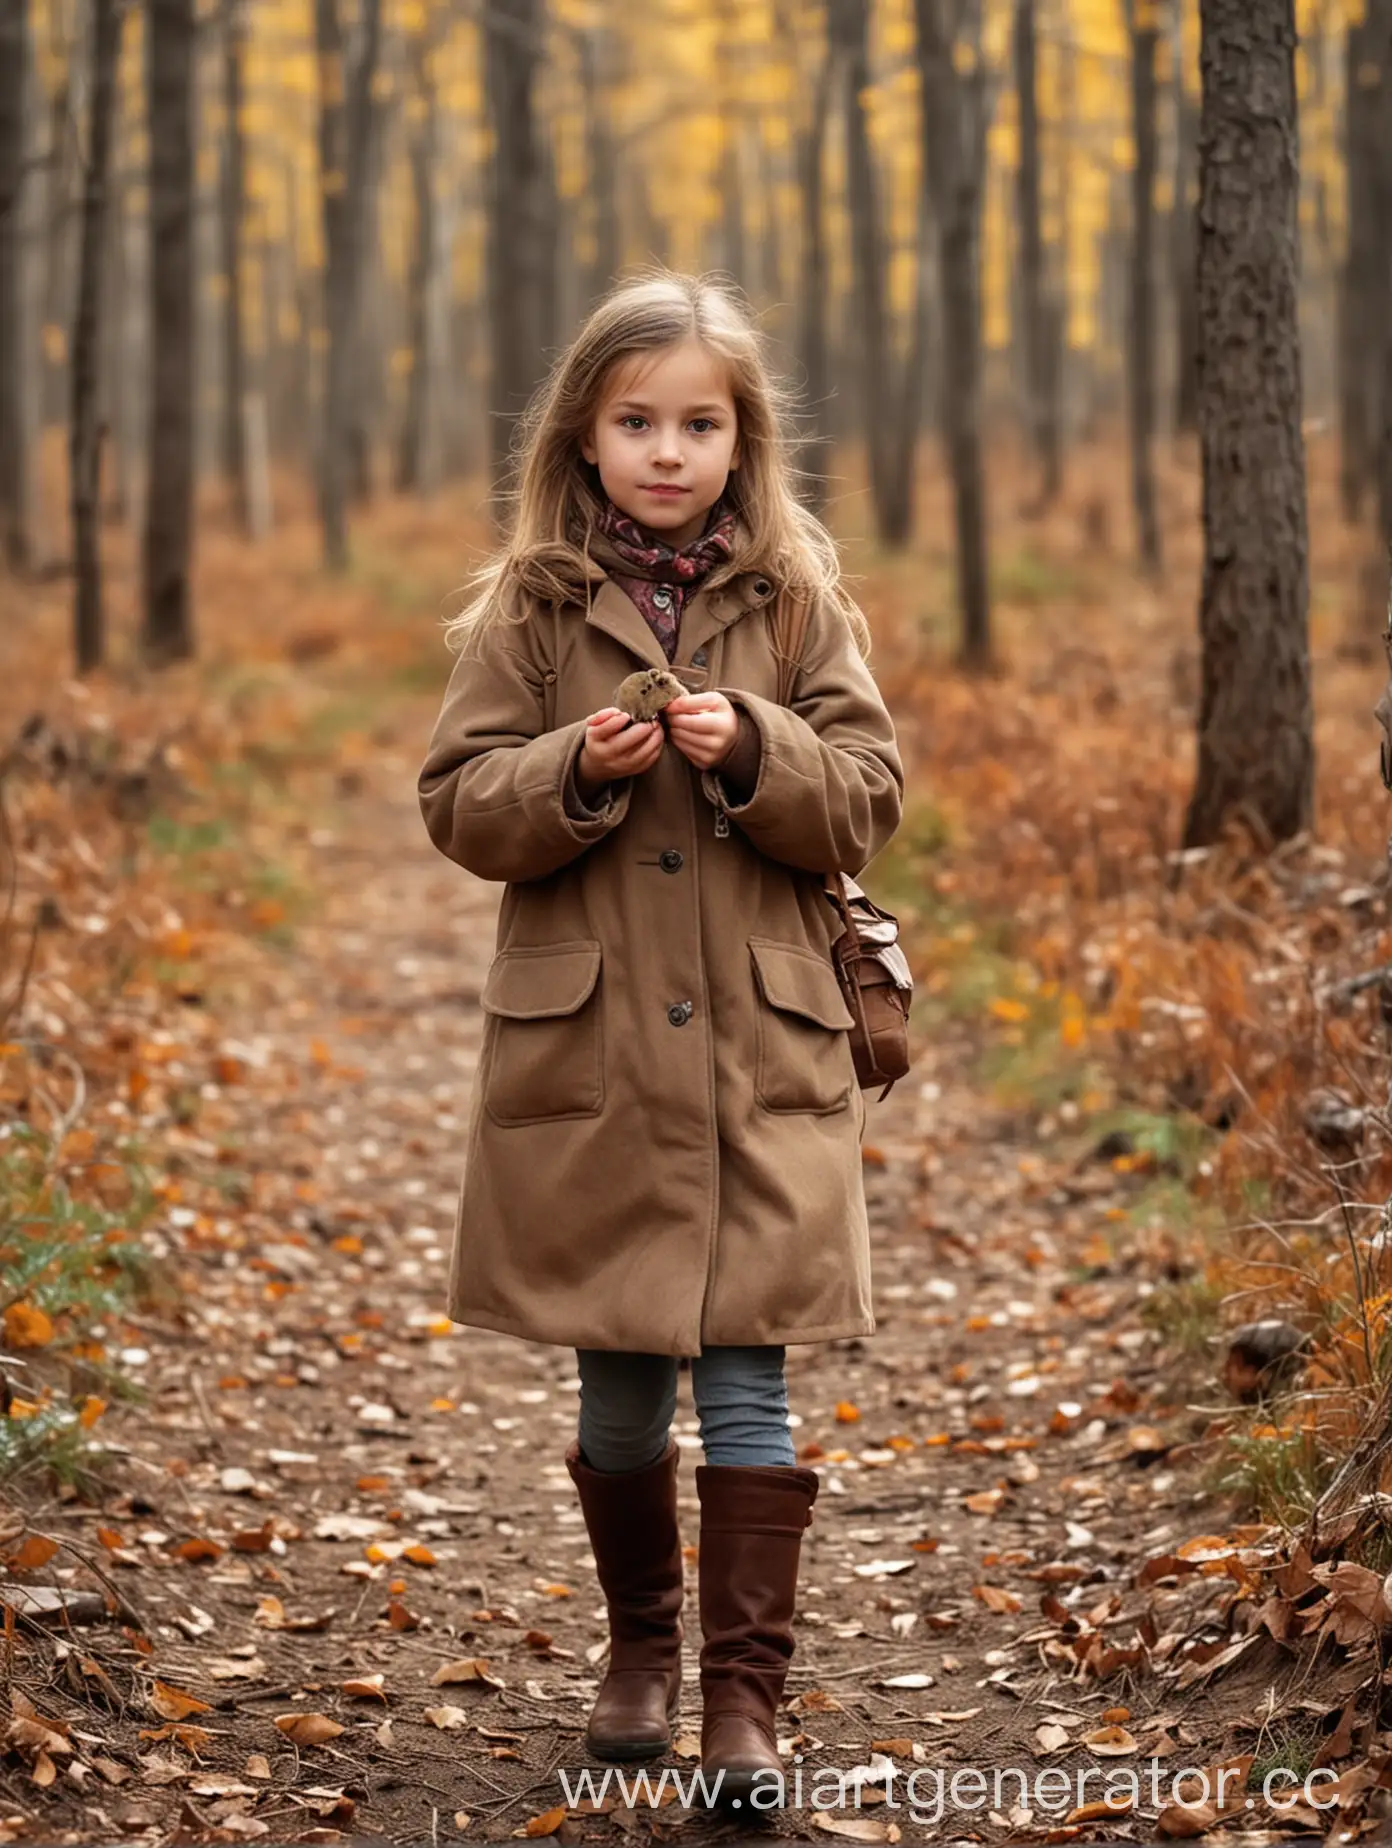 Young-Girl-Walking-in-Autumn-Forest-with-Pet-Mouse